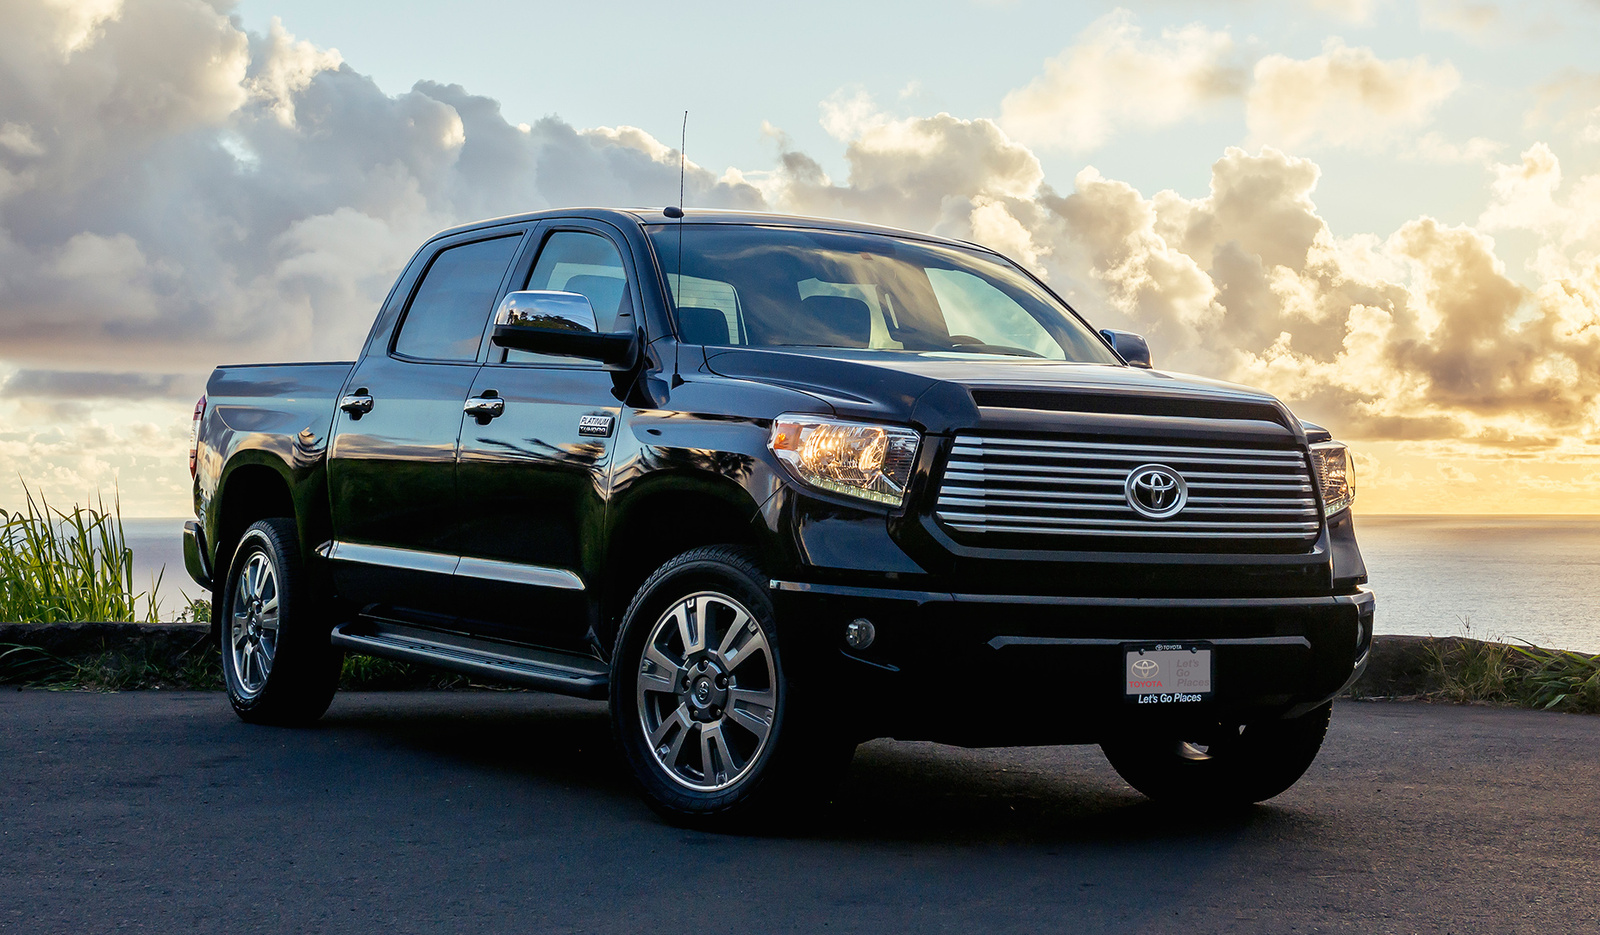 Video Review: 2016 Toyota Tundra Expert Test Drive - CarGurus